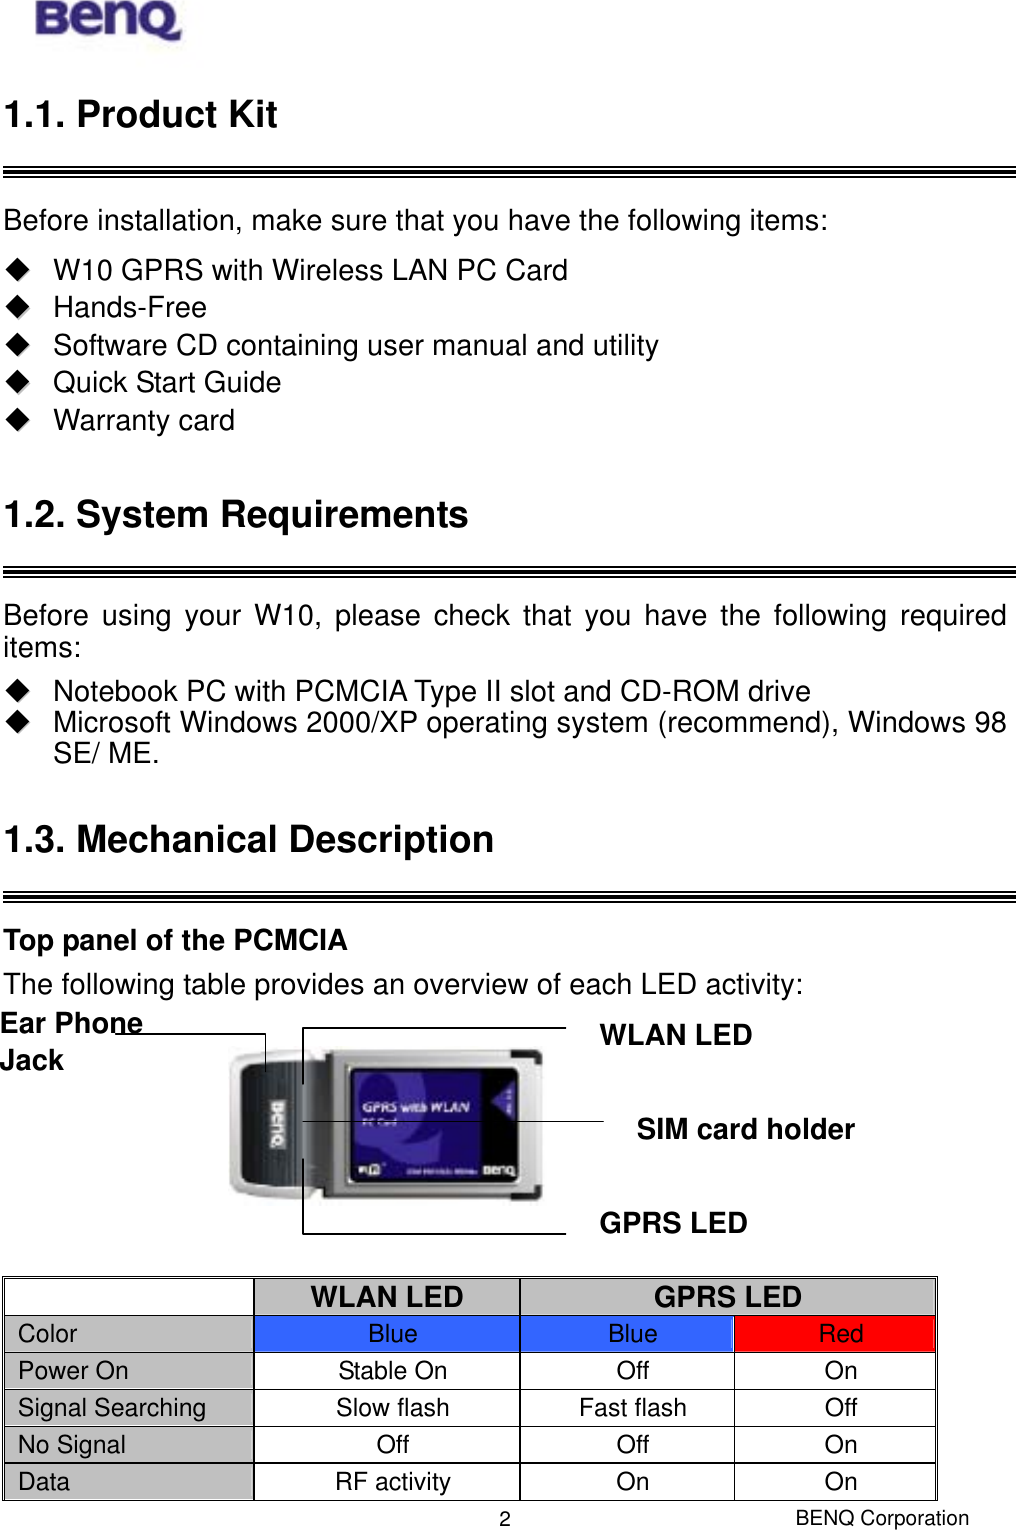  BENQ Corporation 2              1.1. Product Kit  Before installation, make sure that you have the following items: W10 GPRS with Wireless LAN PC Card Hands-Free Software CD containing user manual and utility Quick Start Guide Warranty card  1.2. System Requirements  Before using your W10, please check that you have the following required items: Notebook PC with PCMCIA Type II slot and CD-ROM drive Microsoft Windows 2000/XP operating system (recommend), Windows 98 SE/ ME.  1.3. Mechanical Description  Top panel of the PCMCIA The following table provides an overview of each LED activity:  Ear Phone Jack GPRS LED WLAN LED  SIM card holder     WLAN LED  GPRS LED Color  Blue  Blue  Red Power On  Stable On   Off   On Signal Searching  Slow flash  Fast flash  Off No Signal  Off Off On Data  RF activity  On  On 